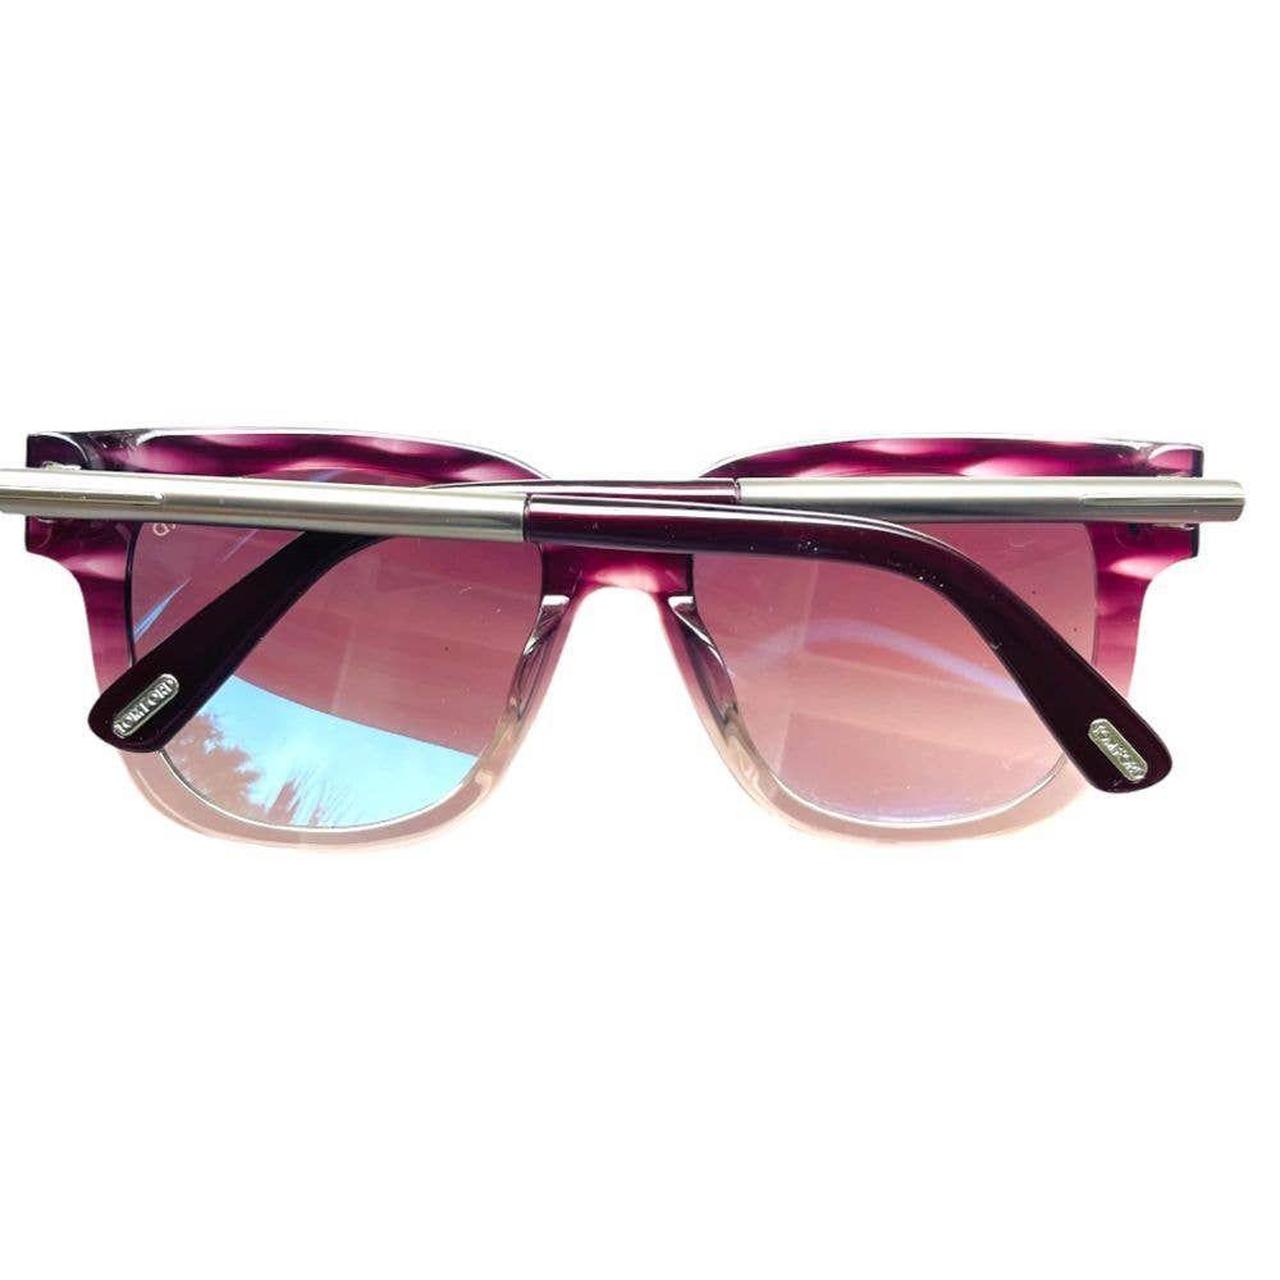 TOM FORD Women's Purple and Silver Sunglasses (3)